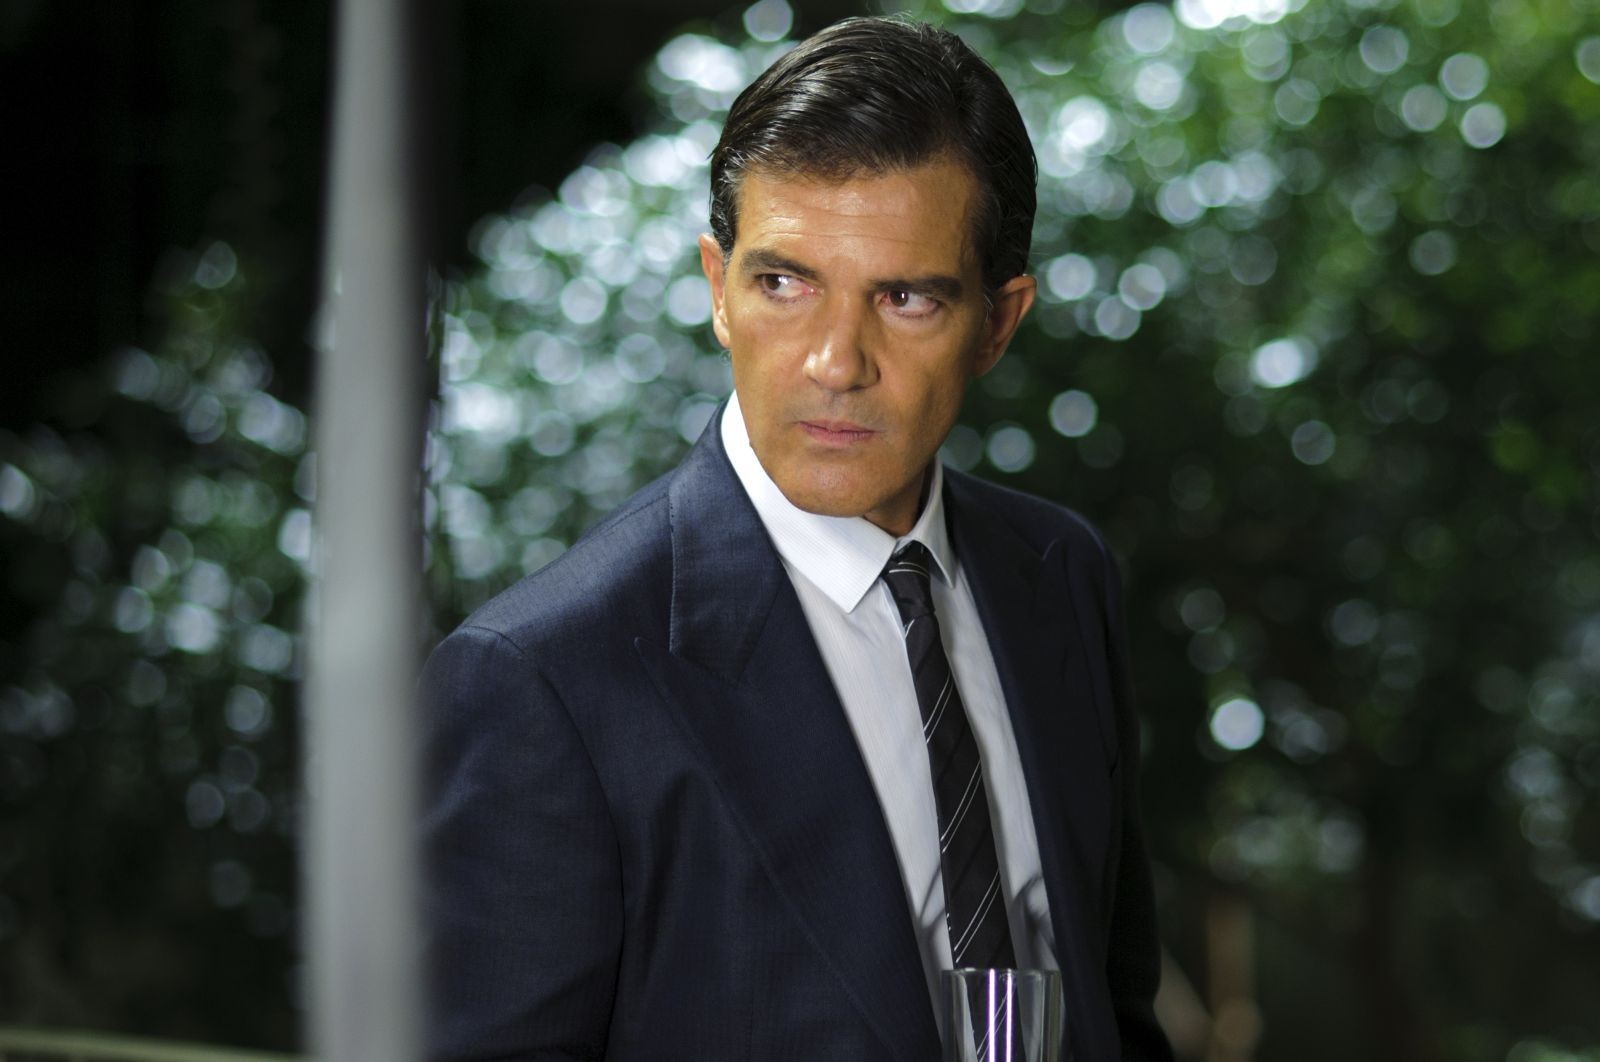 Antonio Banderas stars as Robert Ledgard in Sony Pictures Classics' The Skin I Live In (2011). Photo credit by Jose Haro.